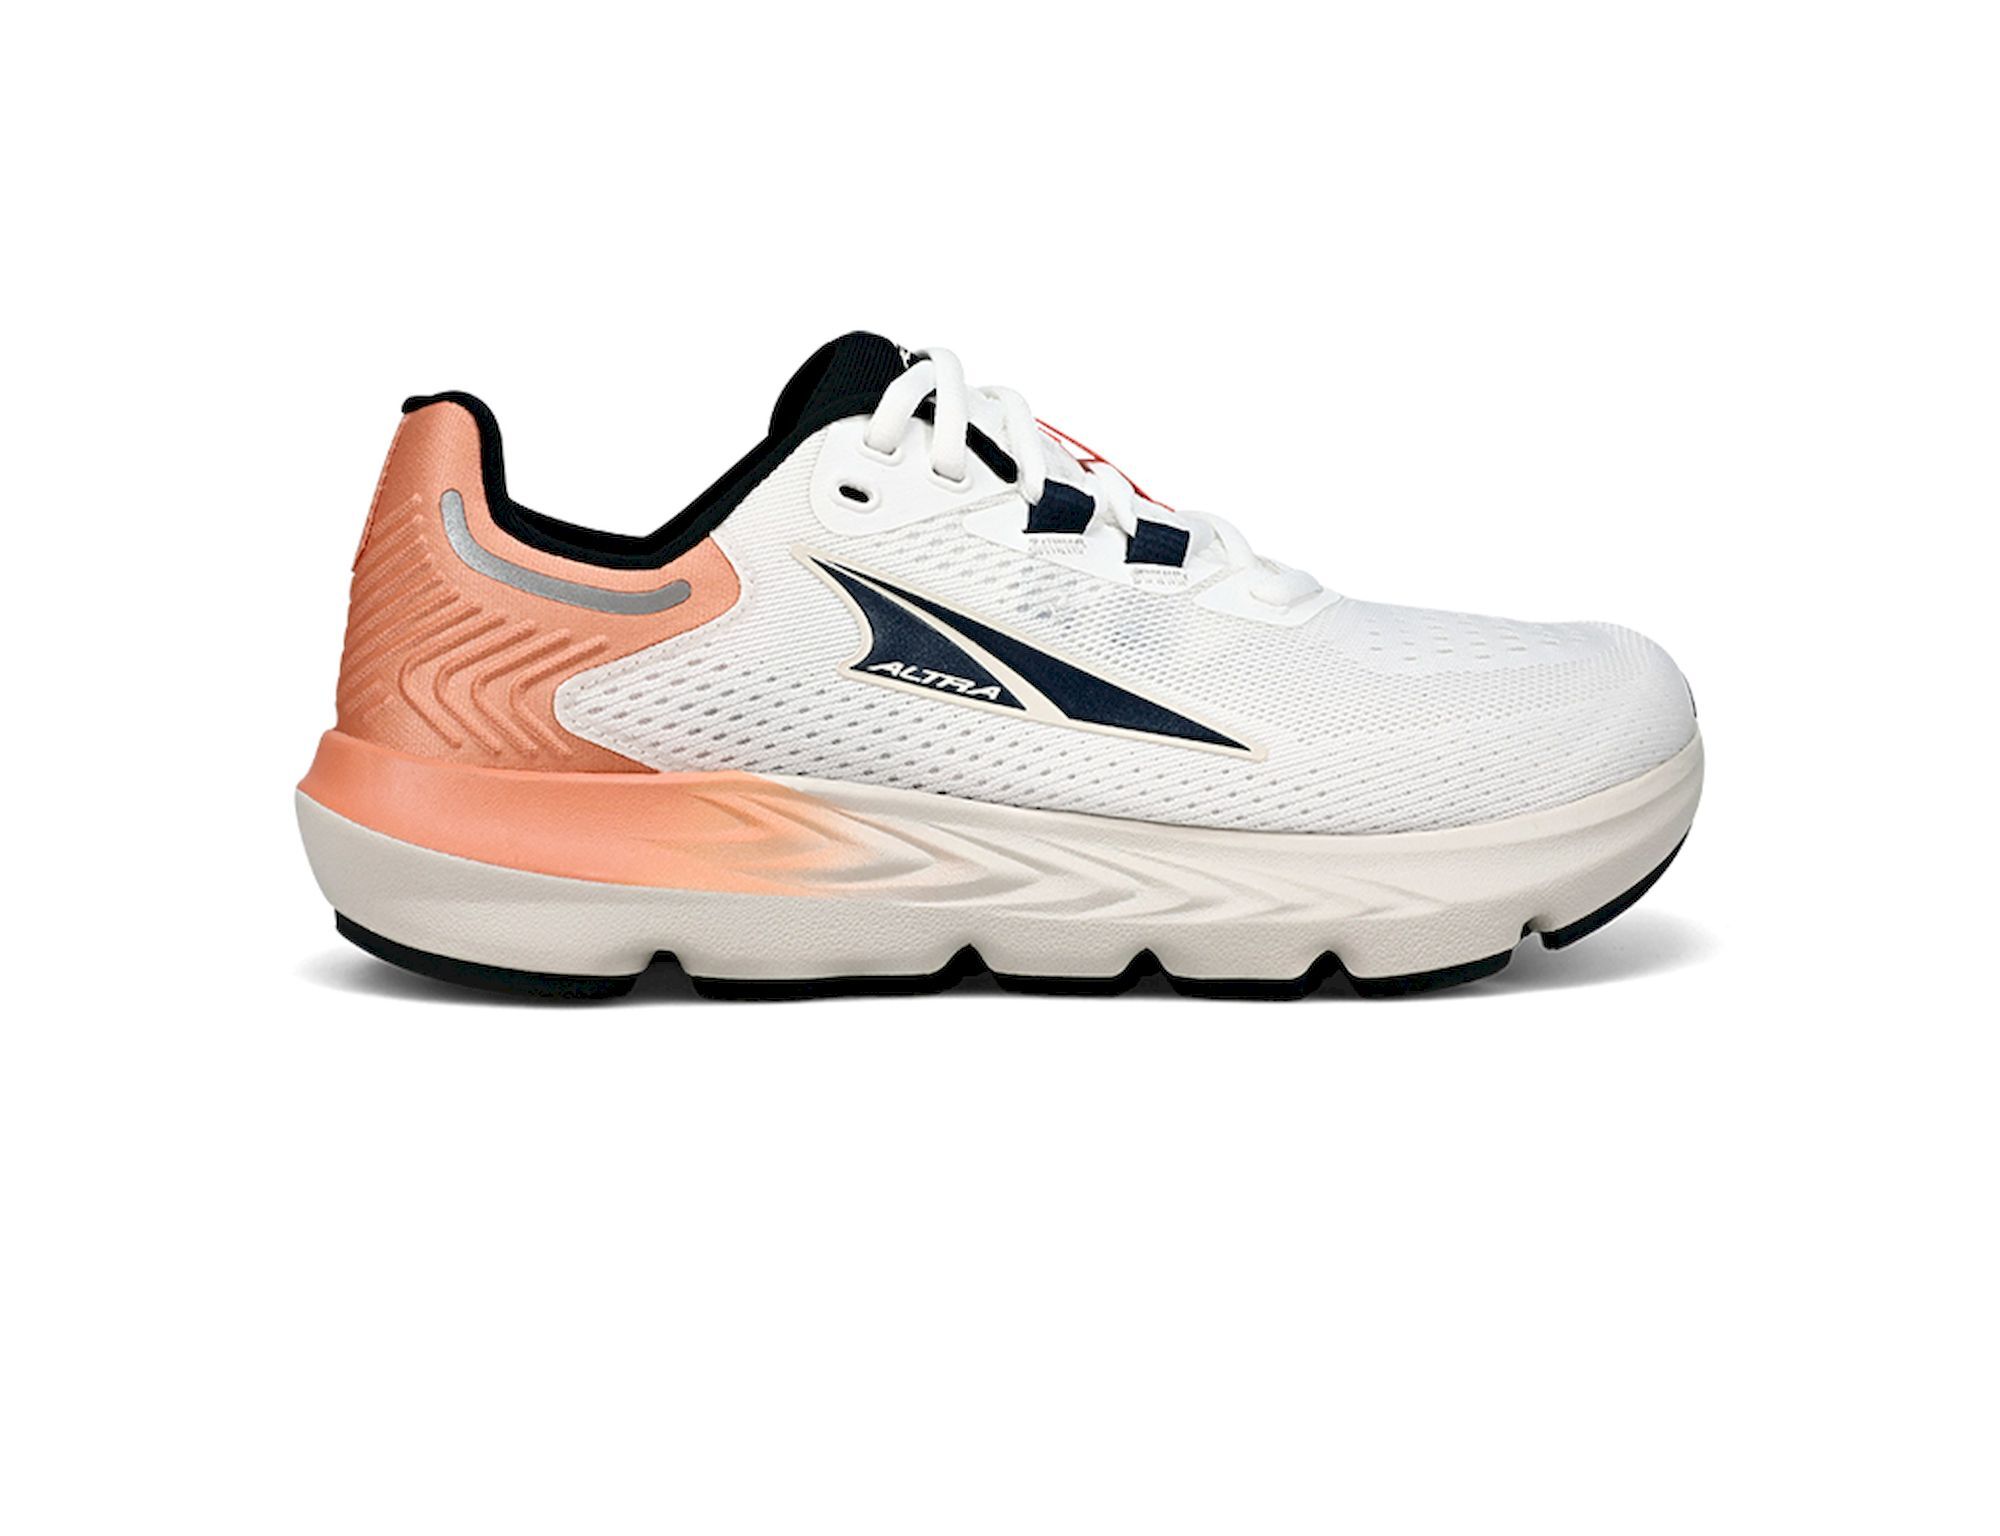 Altra Provision 7 - Chaussures running femme | Hardloop